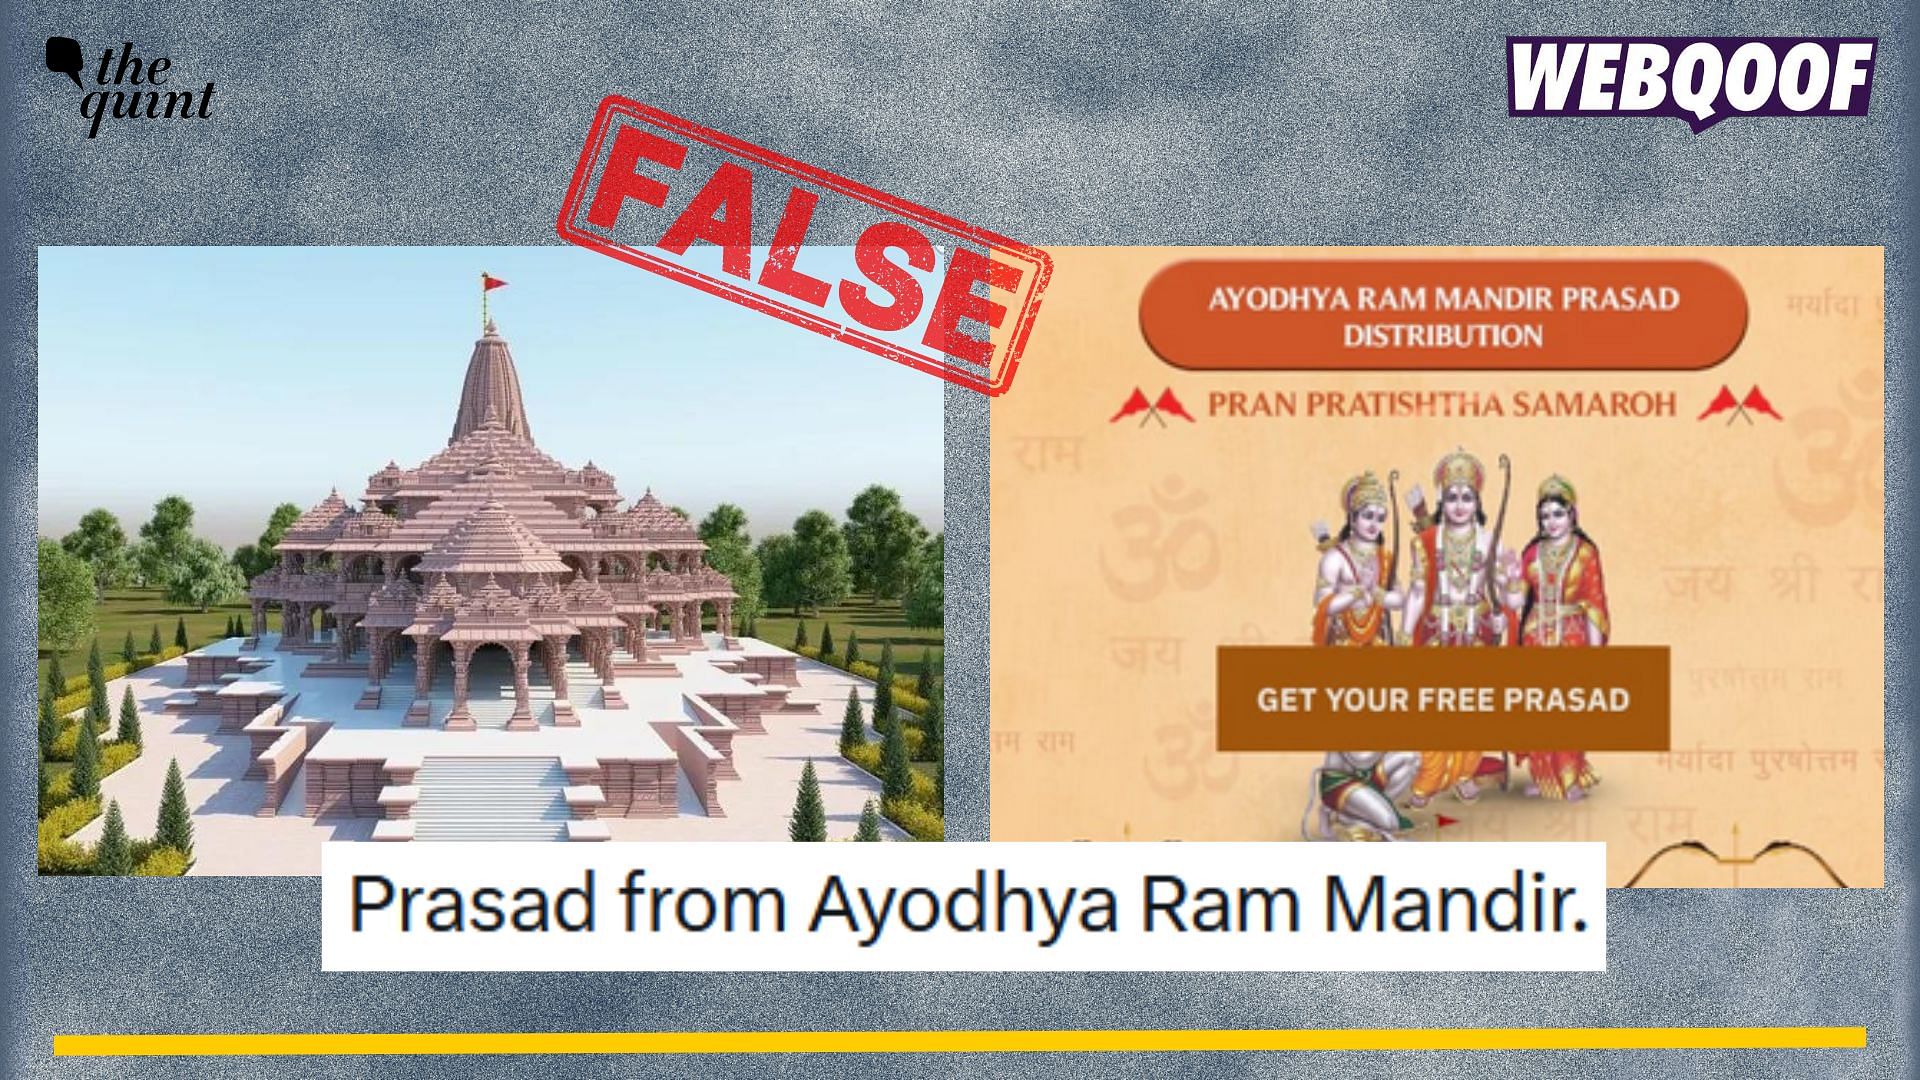 <div class="paragraphs"><p>Fact-check: No, Ayodhya's Ram Temple Is Not 'Delivering Prasad' Across India</p></div>